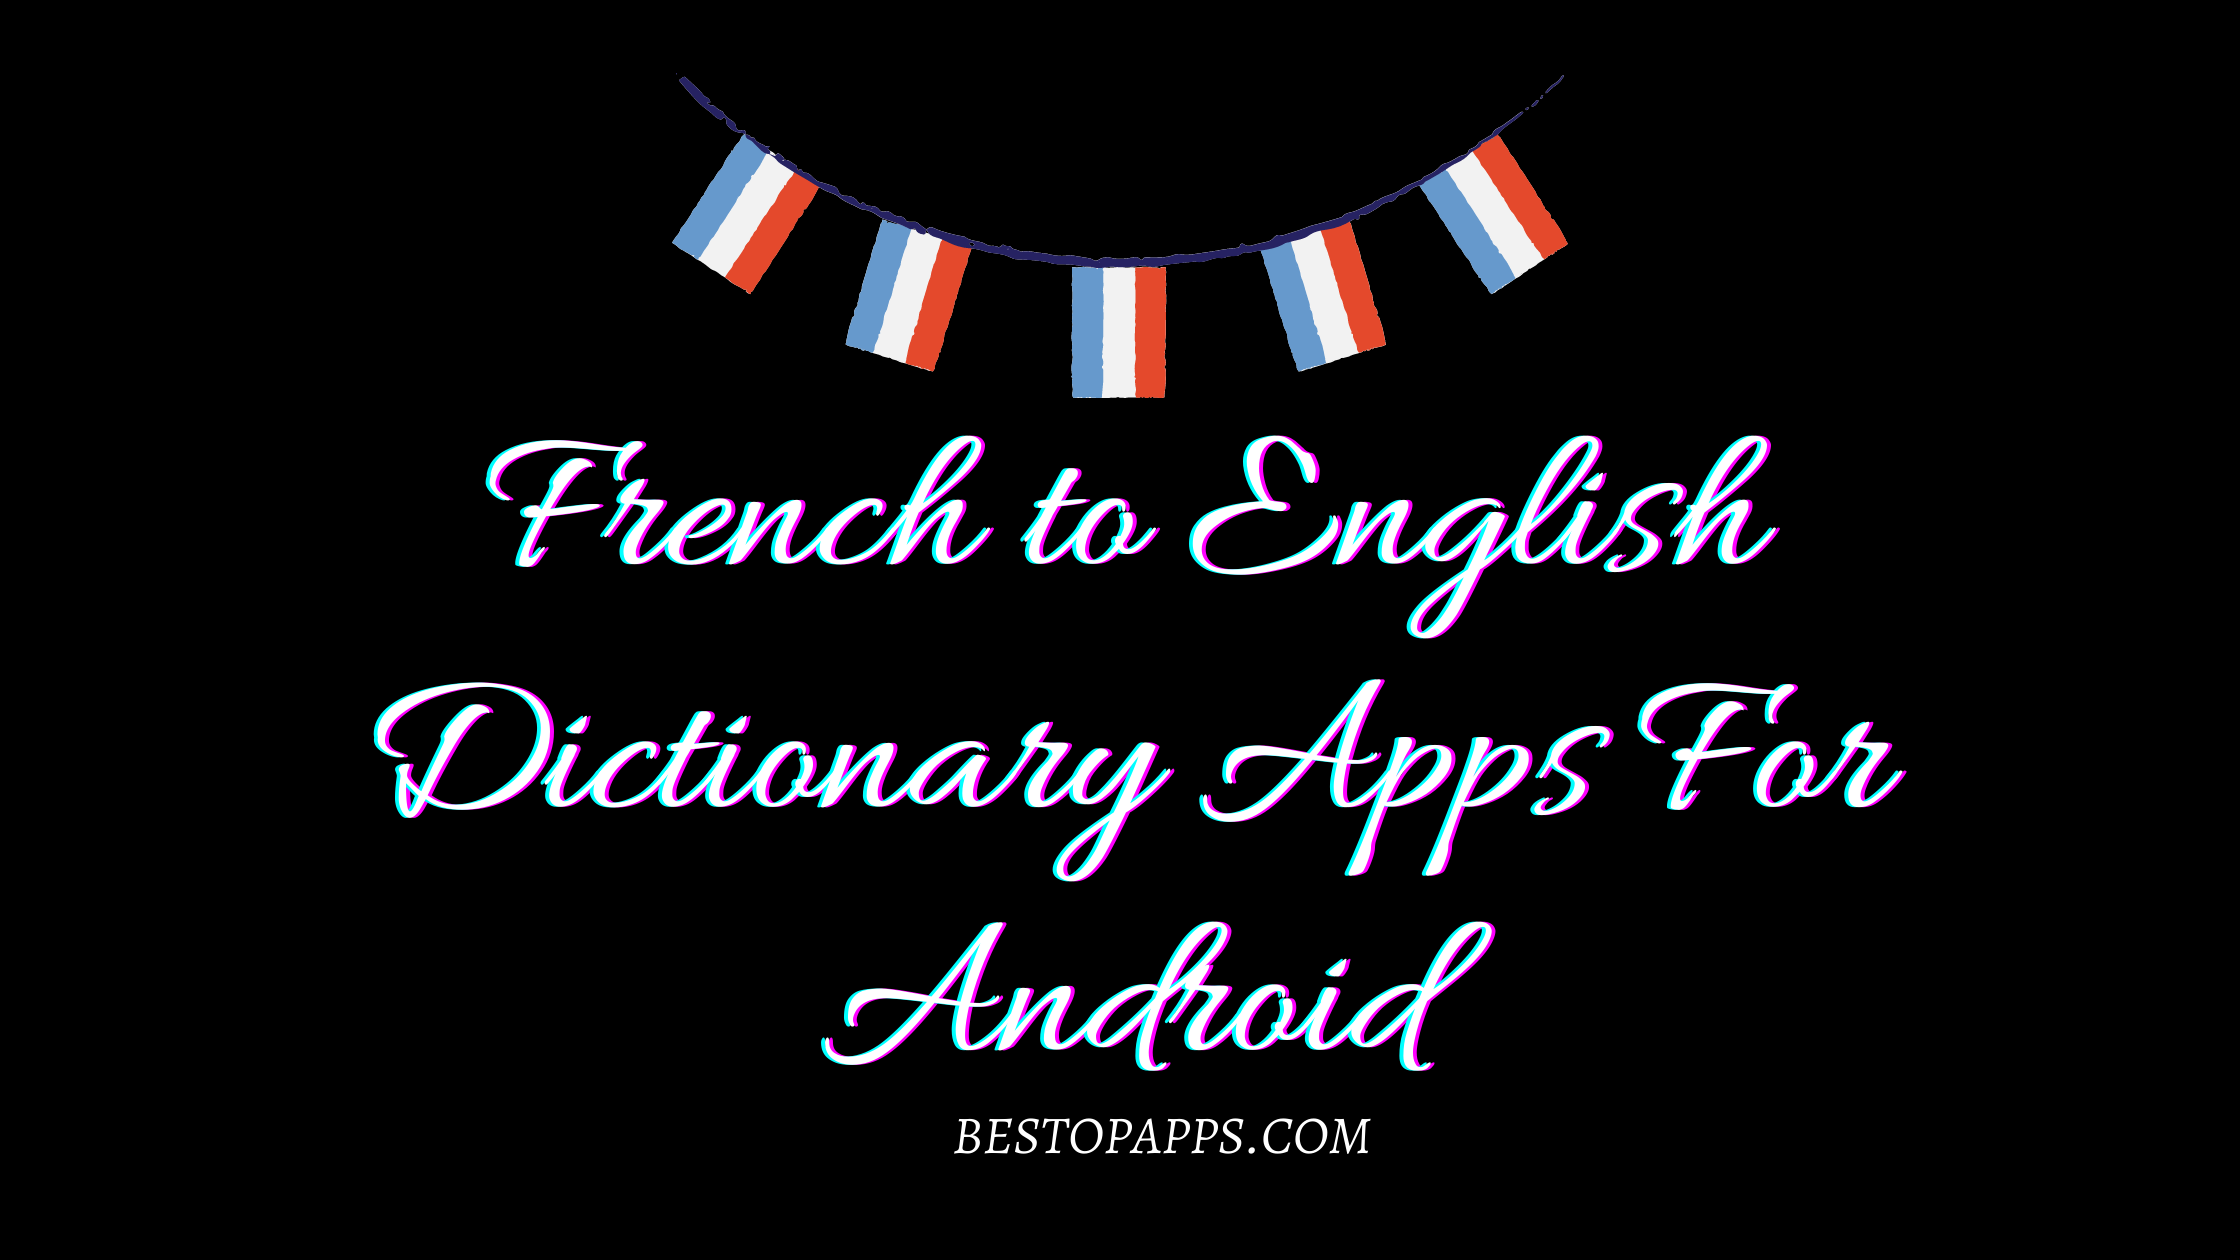 French to English Dictionary Apps For Android